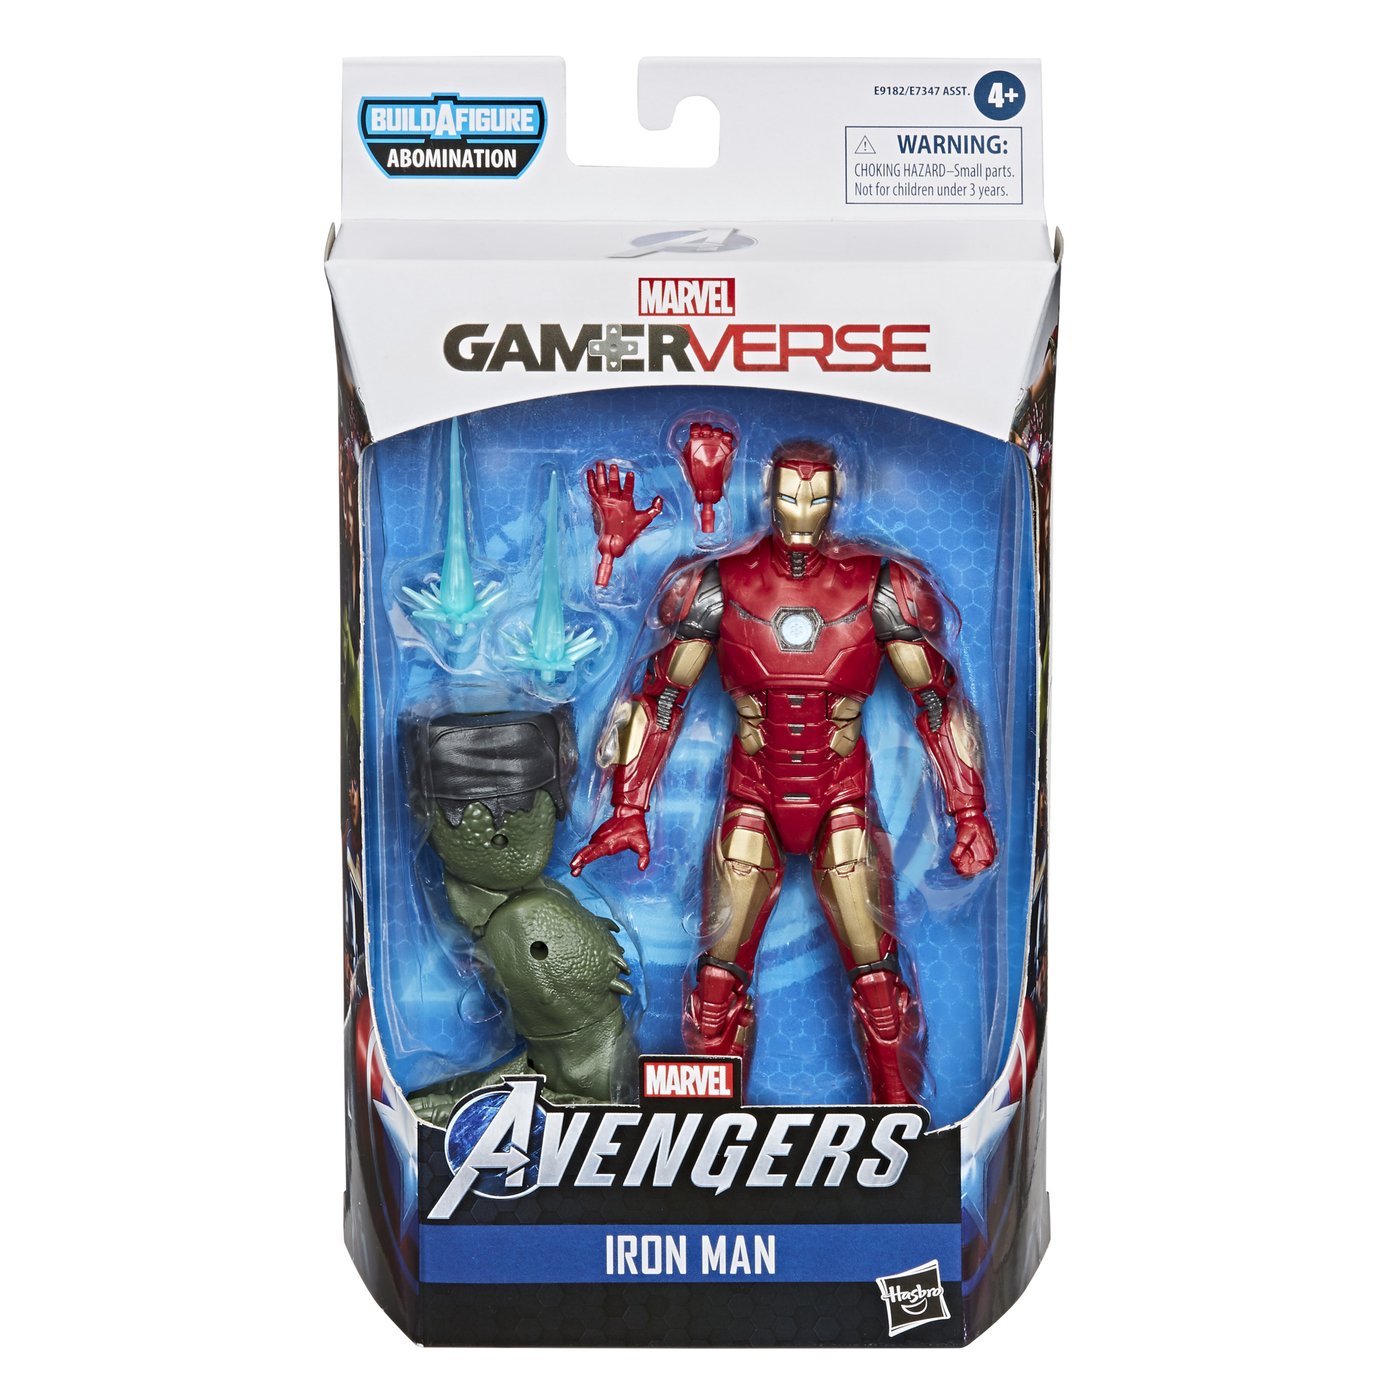 Avengers Video Game Marvel Legends 6-Inch Action Figure Wave 1 Iron Man